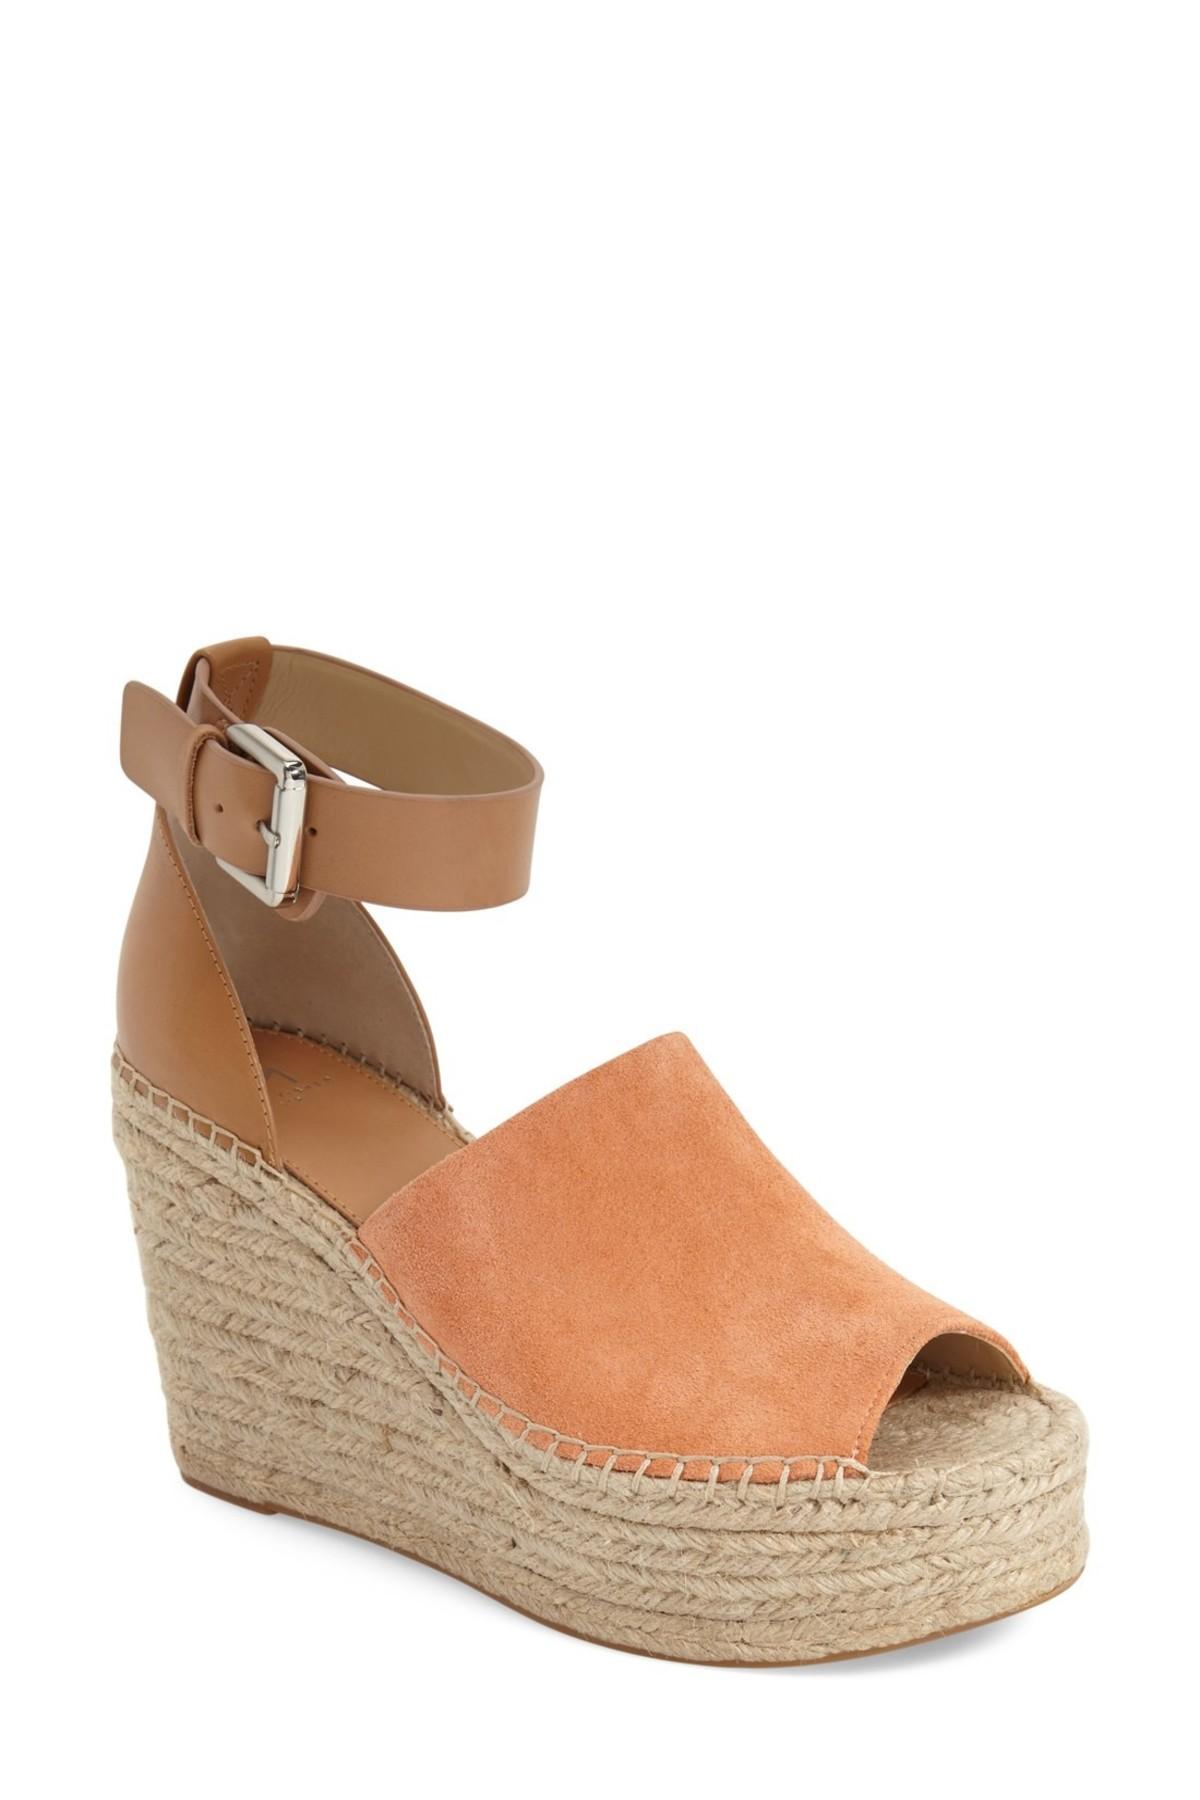 Lyst Marc Fisher Adalyn Leather and Suede Wedge Sandals